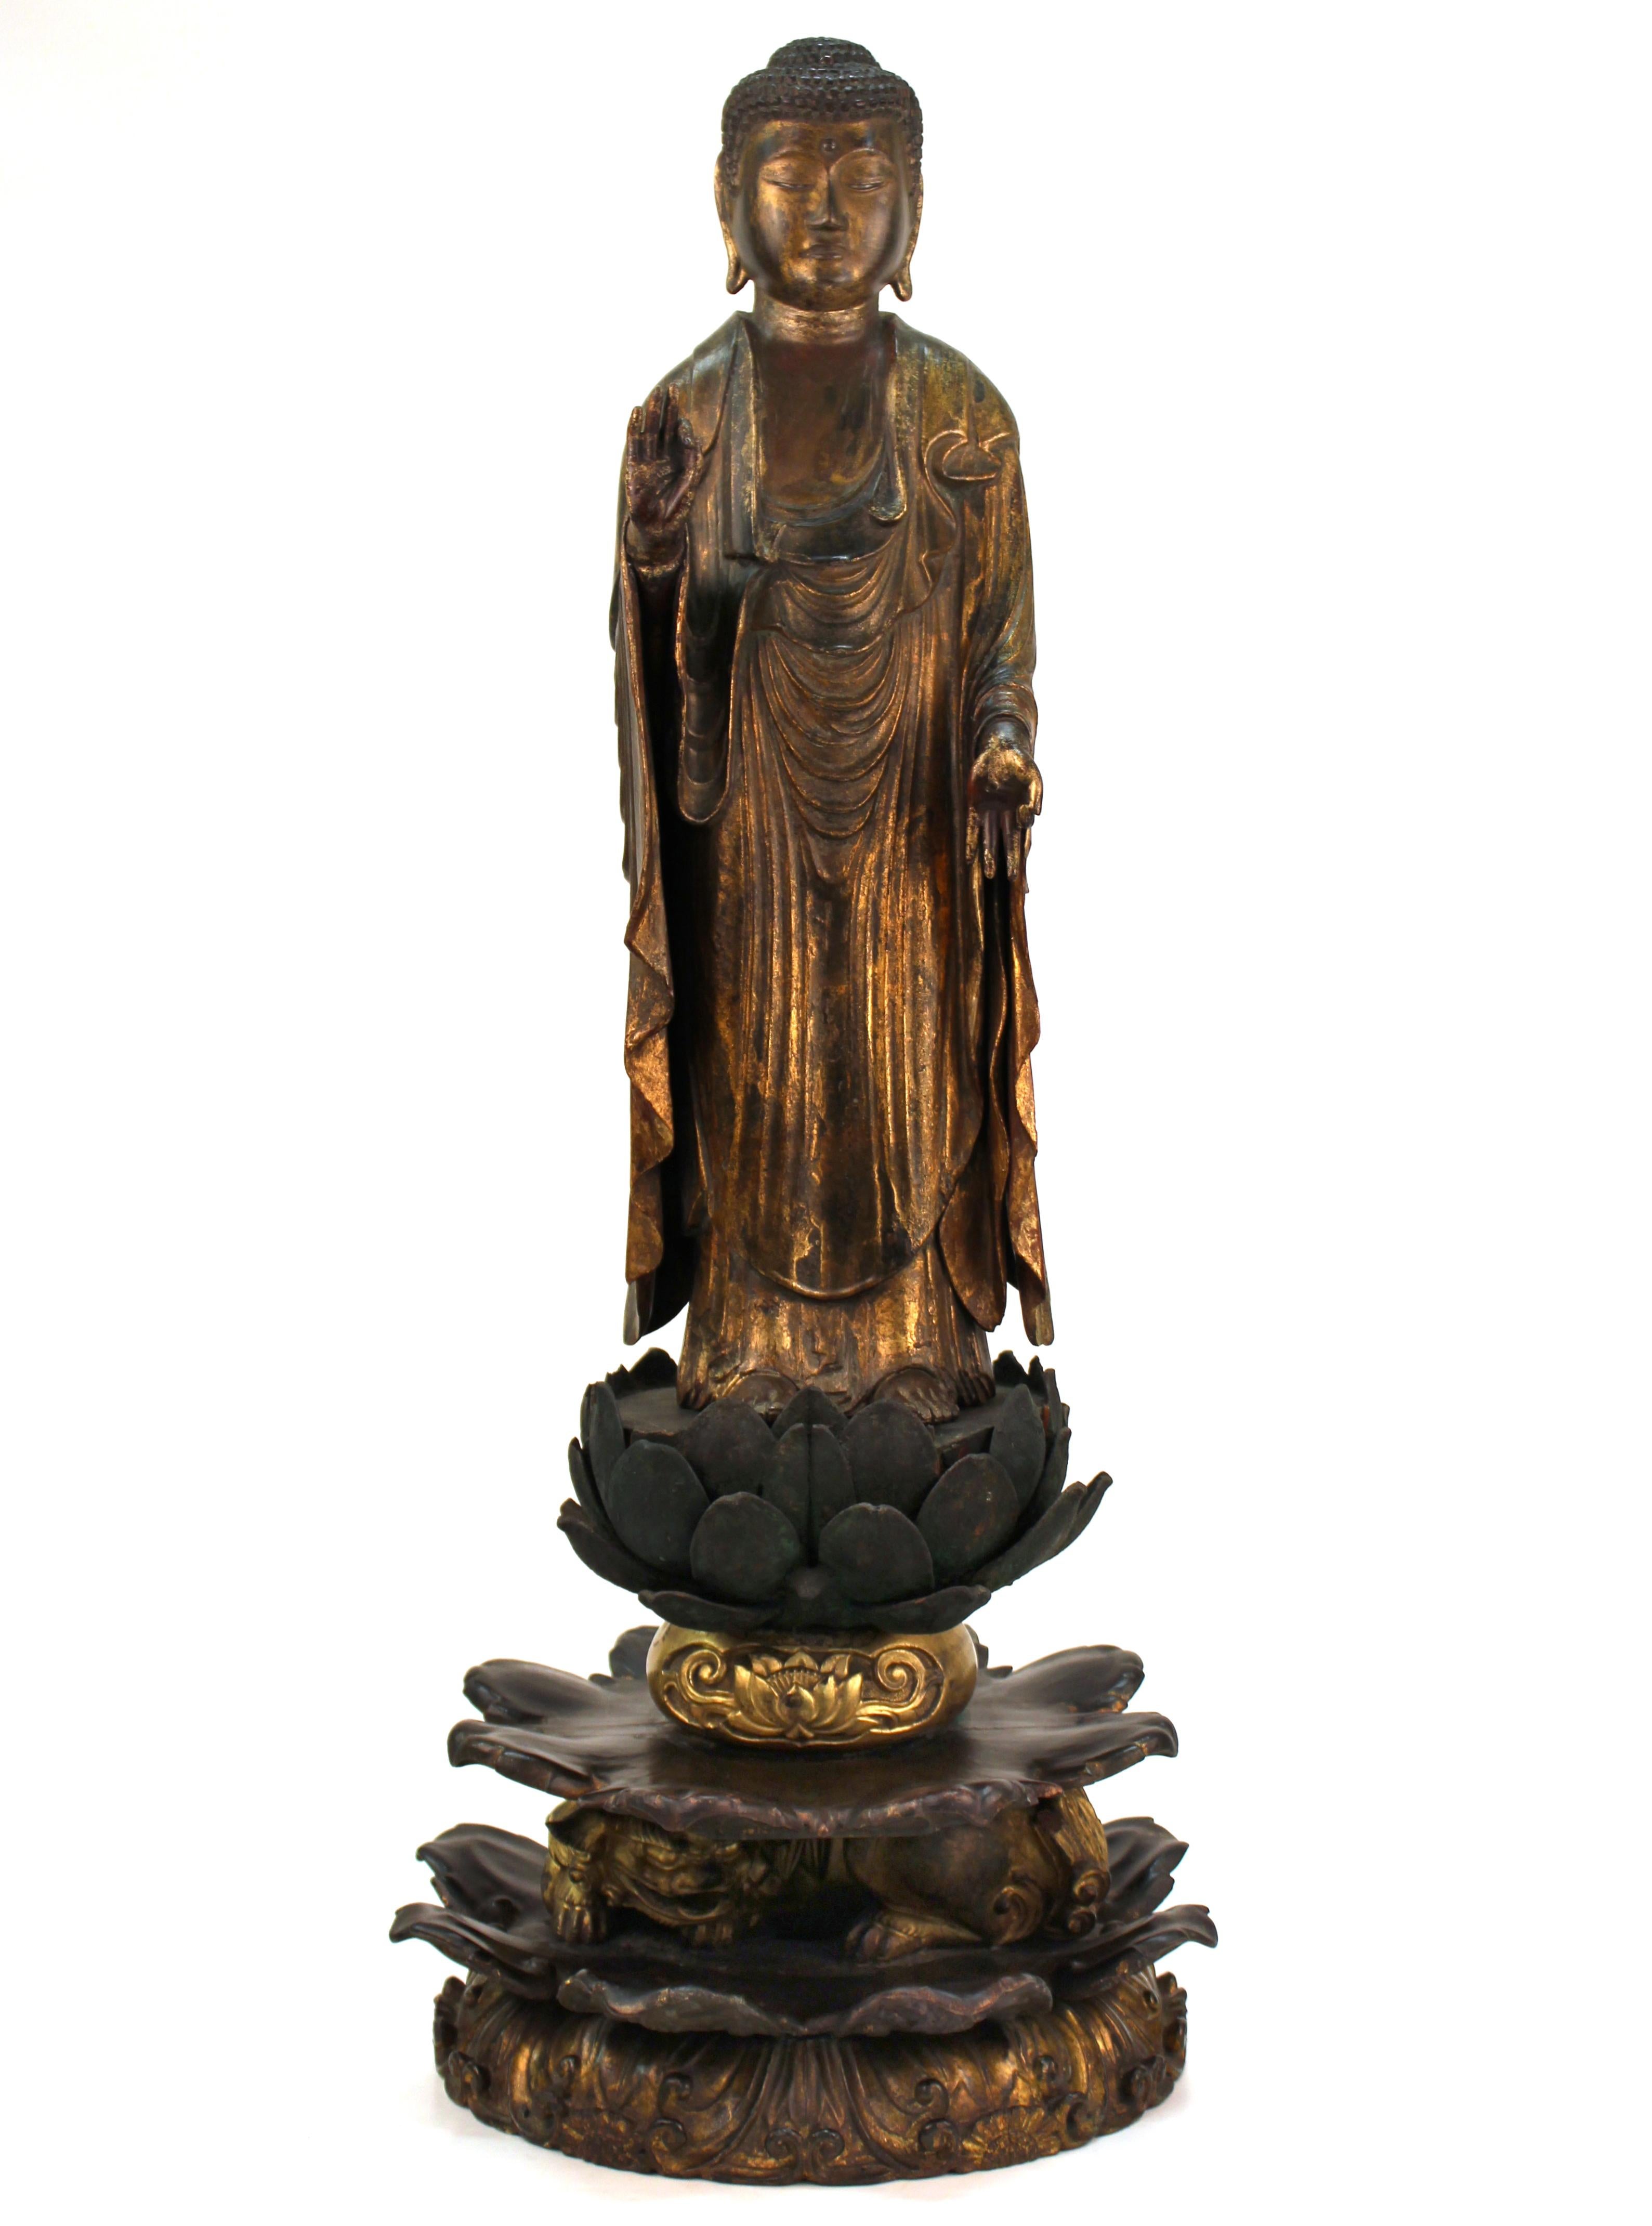 A Japanese carved and gilt wood Buddha figure Amida Nyorai (Buddha Amitabha), 15th C. Sengoku Cypress wood with traces of pigment and lacquer gold leaf. Standing  on a lotus and a gold lacquer Zishi . This important masterpiece is exquisitely caved.